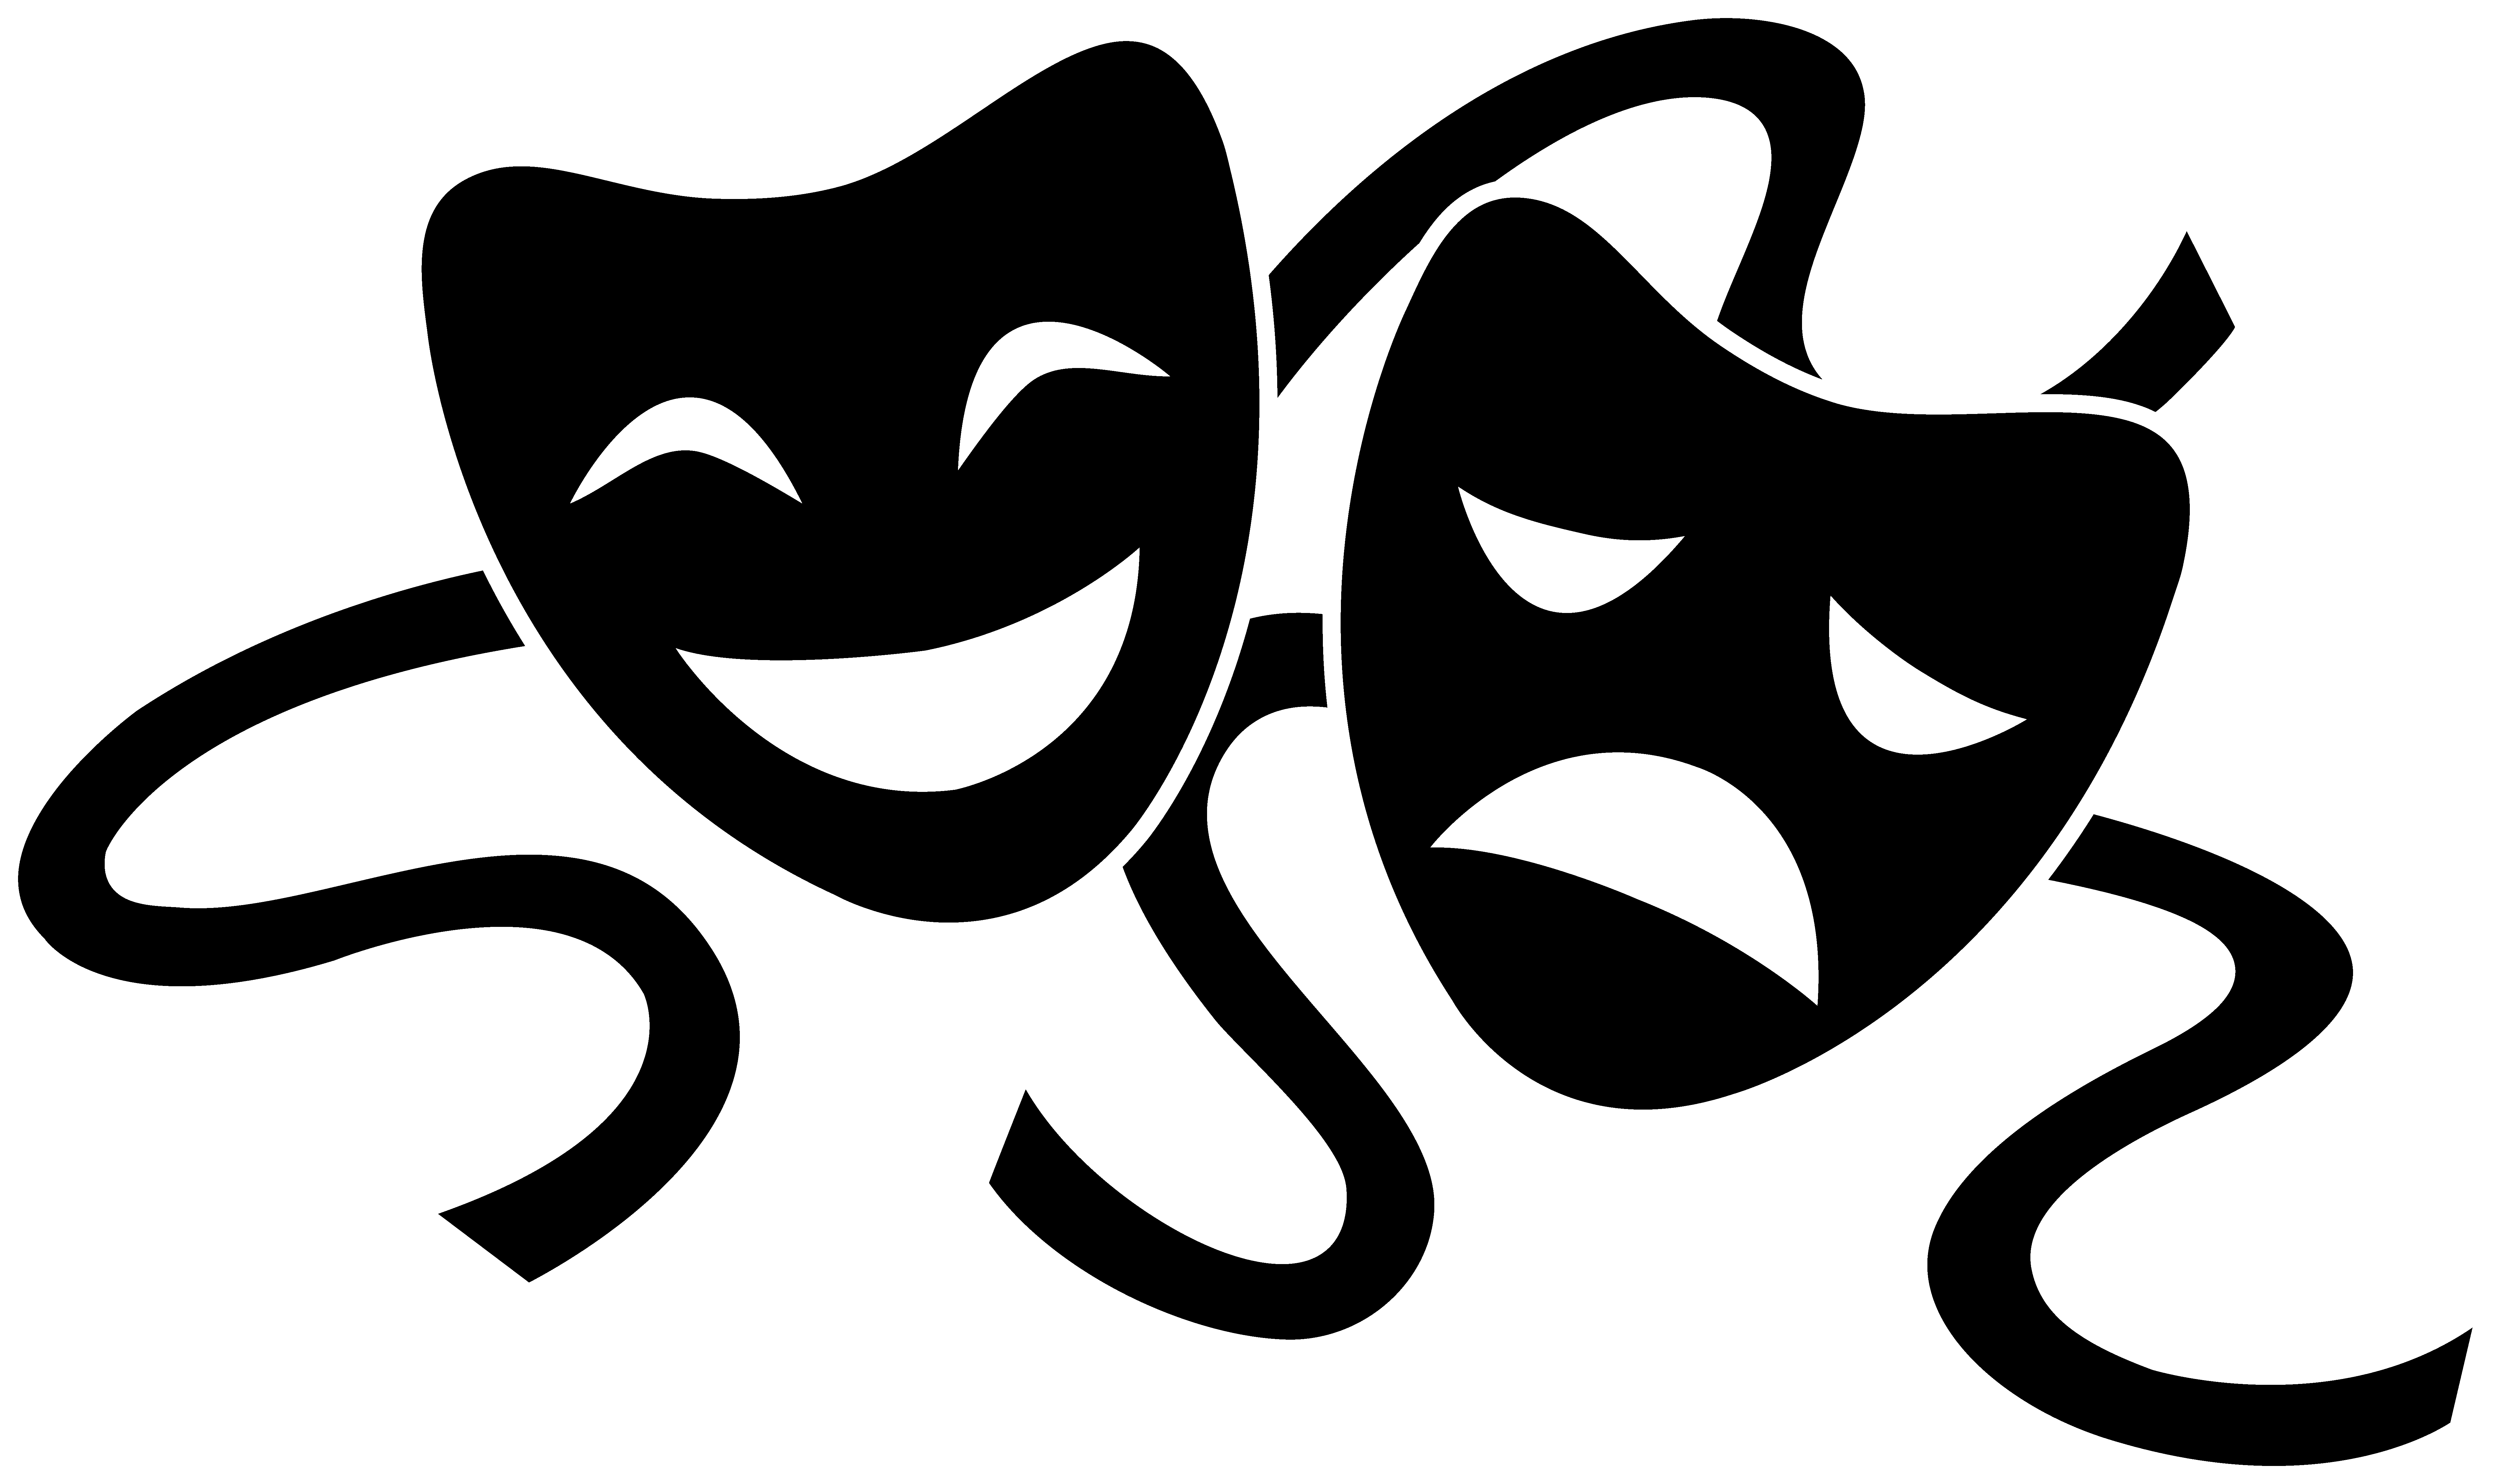 Theater Masks. Ink Black And White Drawings Stock Photo, Picture and  Royalty Free Image. Image 139740859.